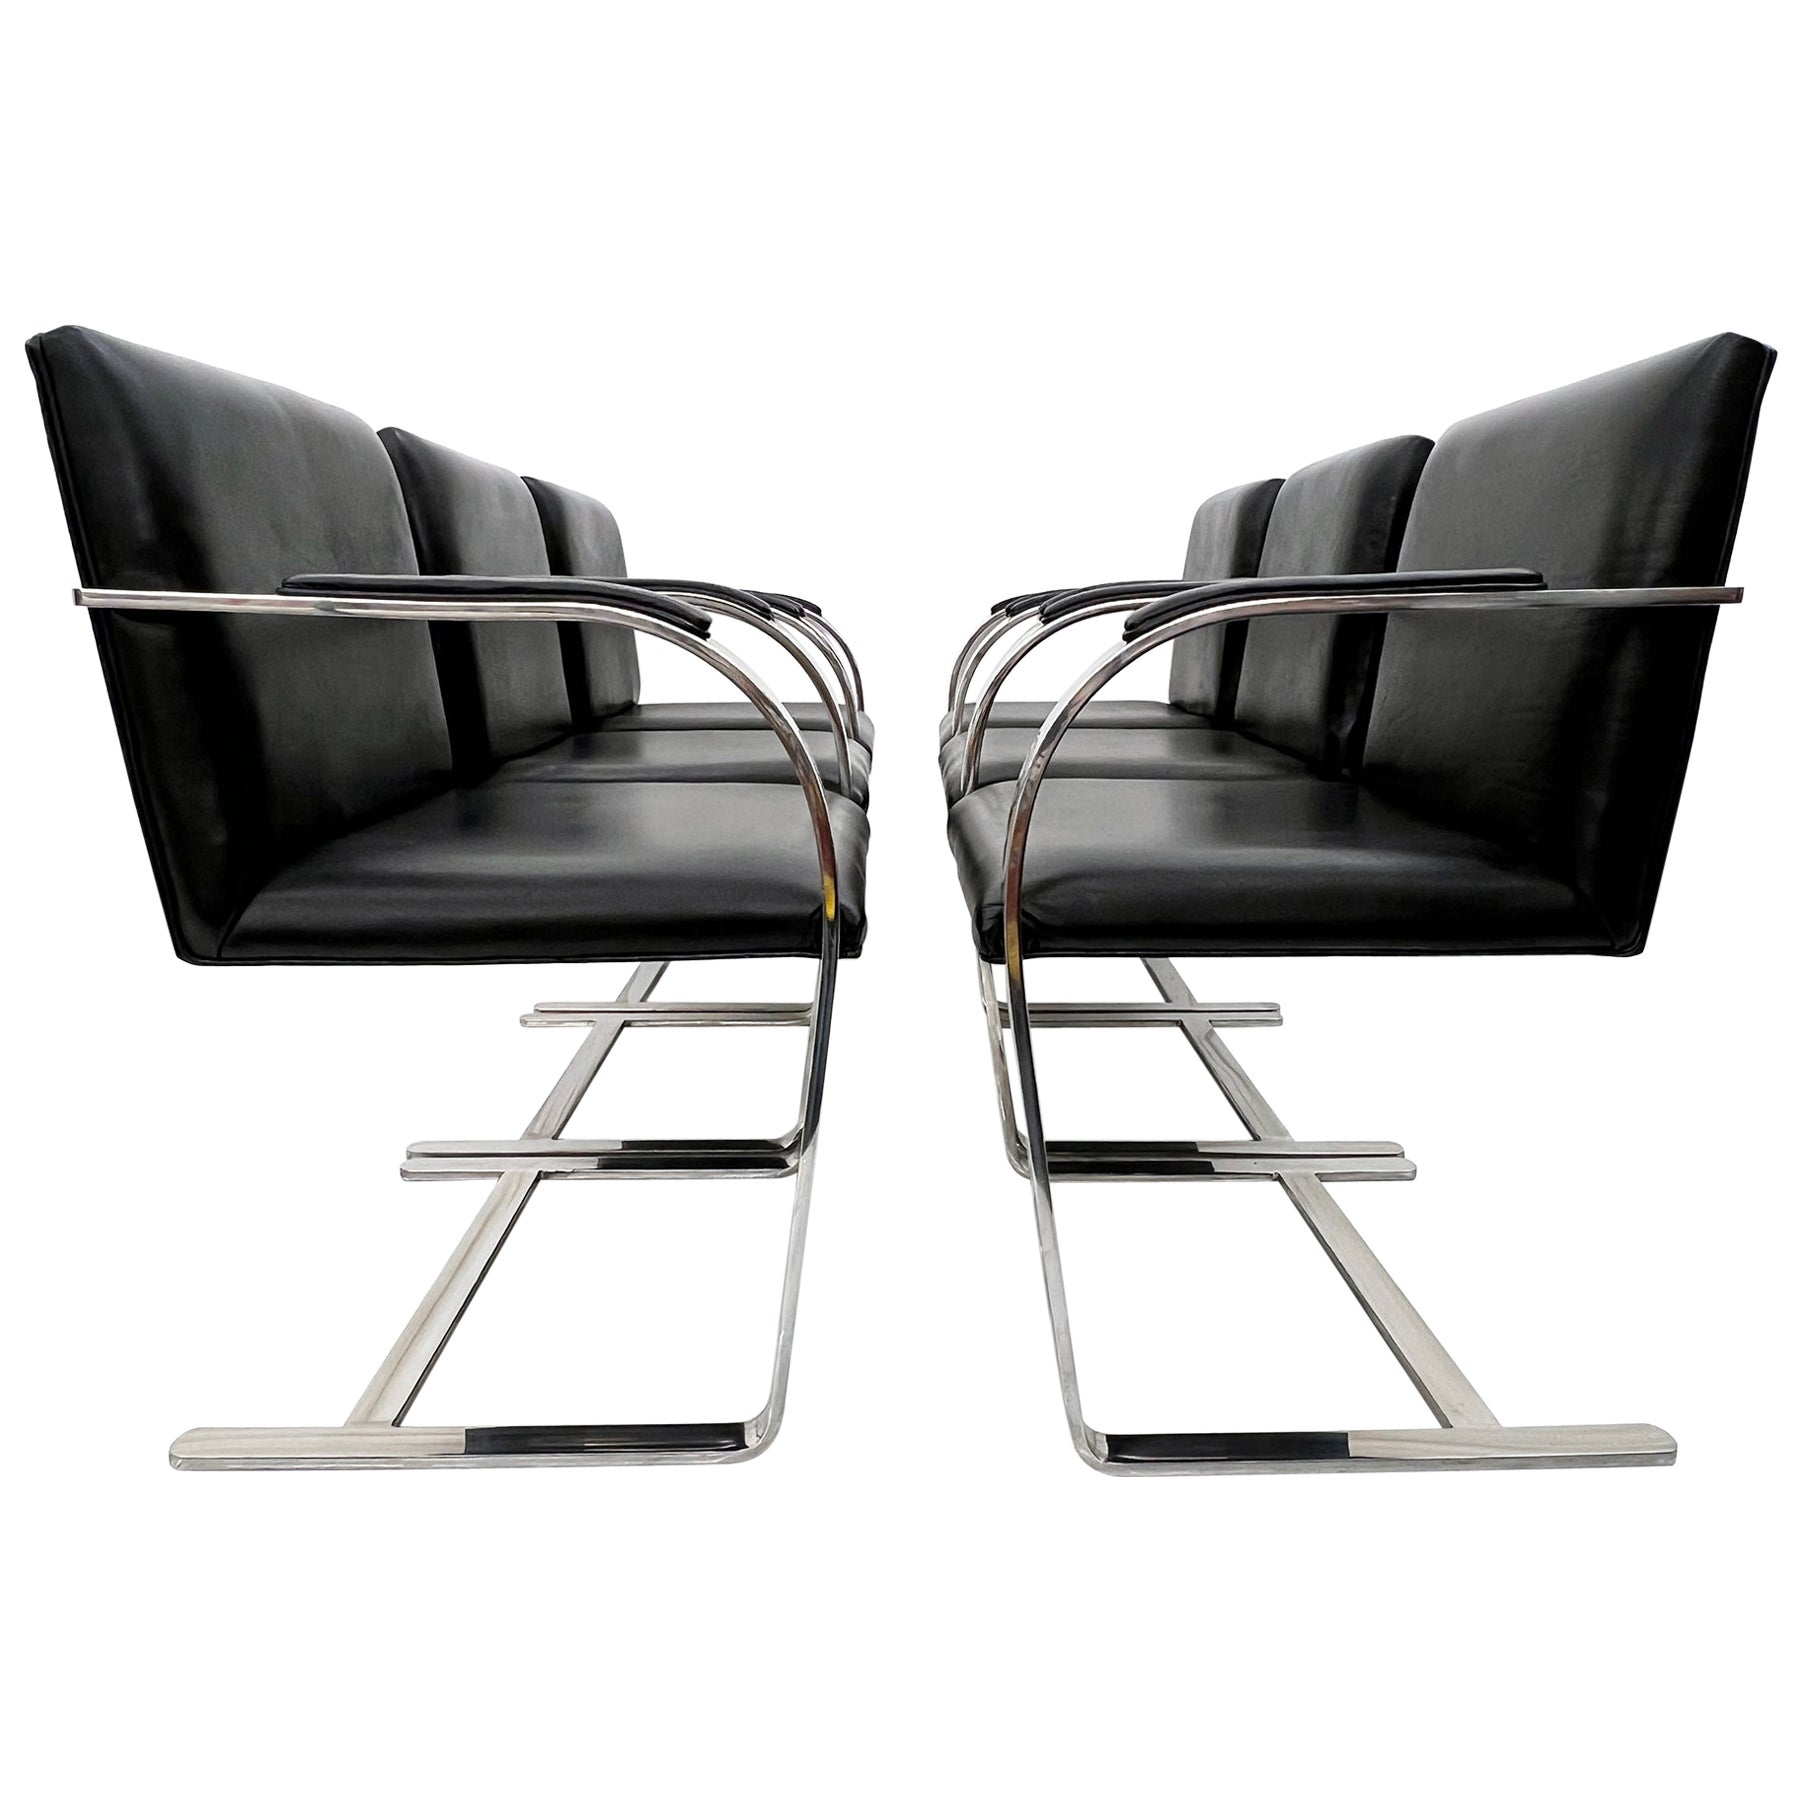 Set of 6 Ludwig Mies van der Rohe Brno Chairs in Black Leather, Knoll